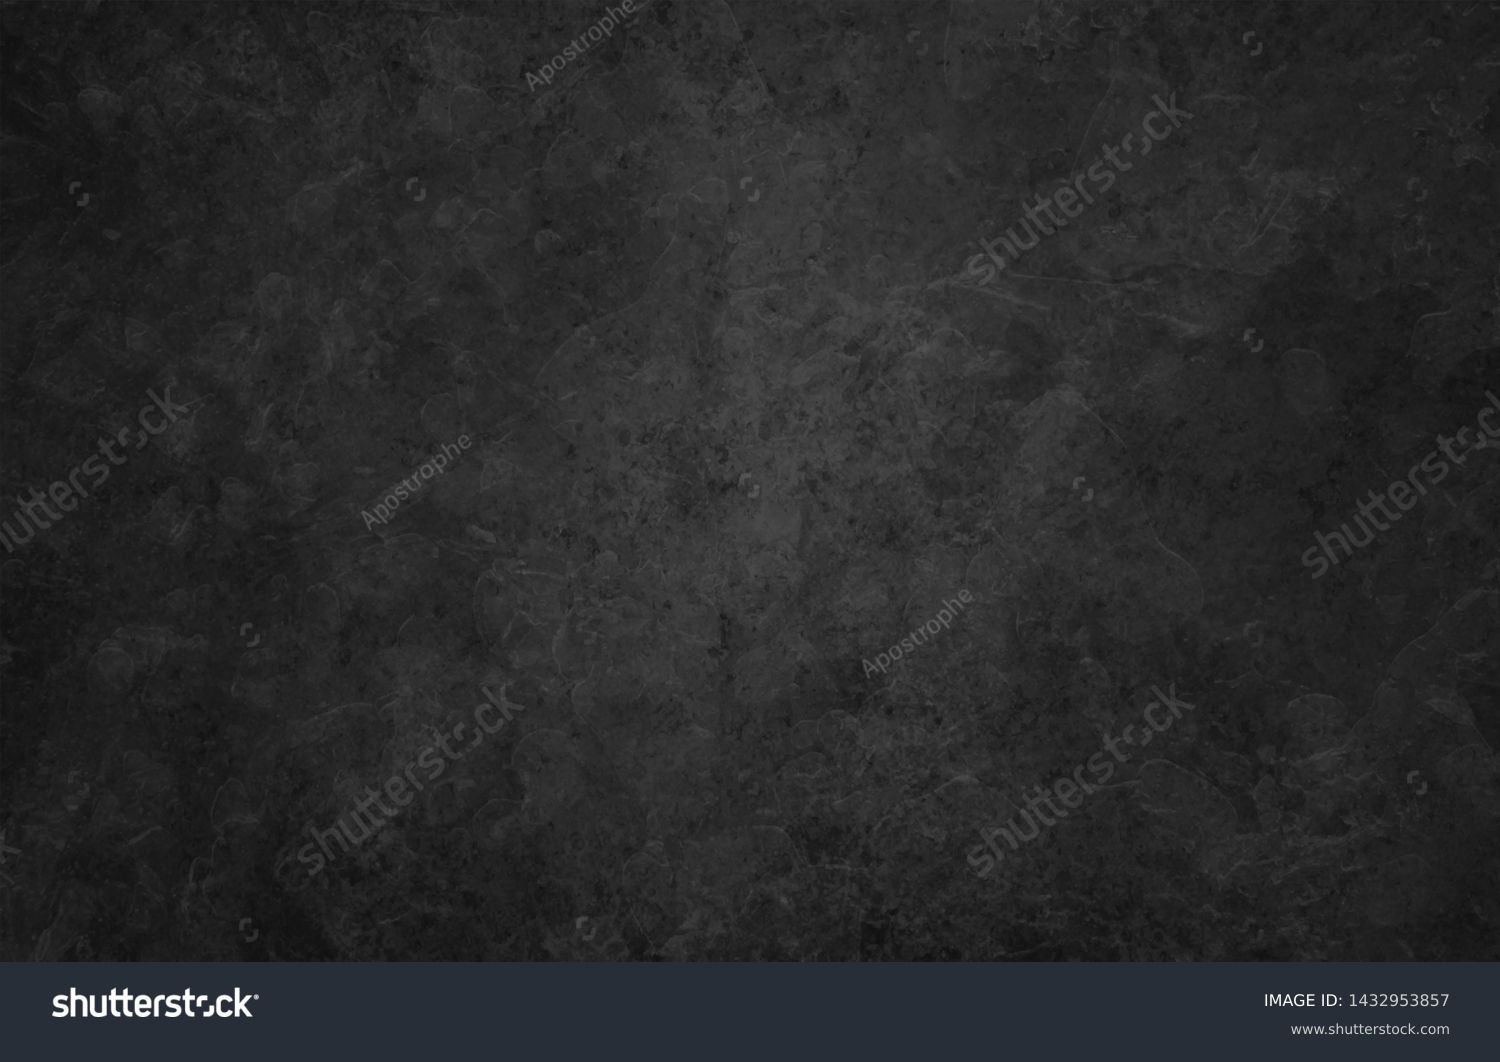 Elegant black background vector illustration with vintage distressed grunge texture and dark gray charcoal color paint #1432953857